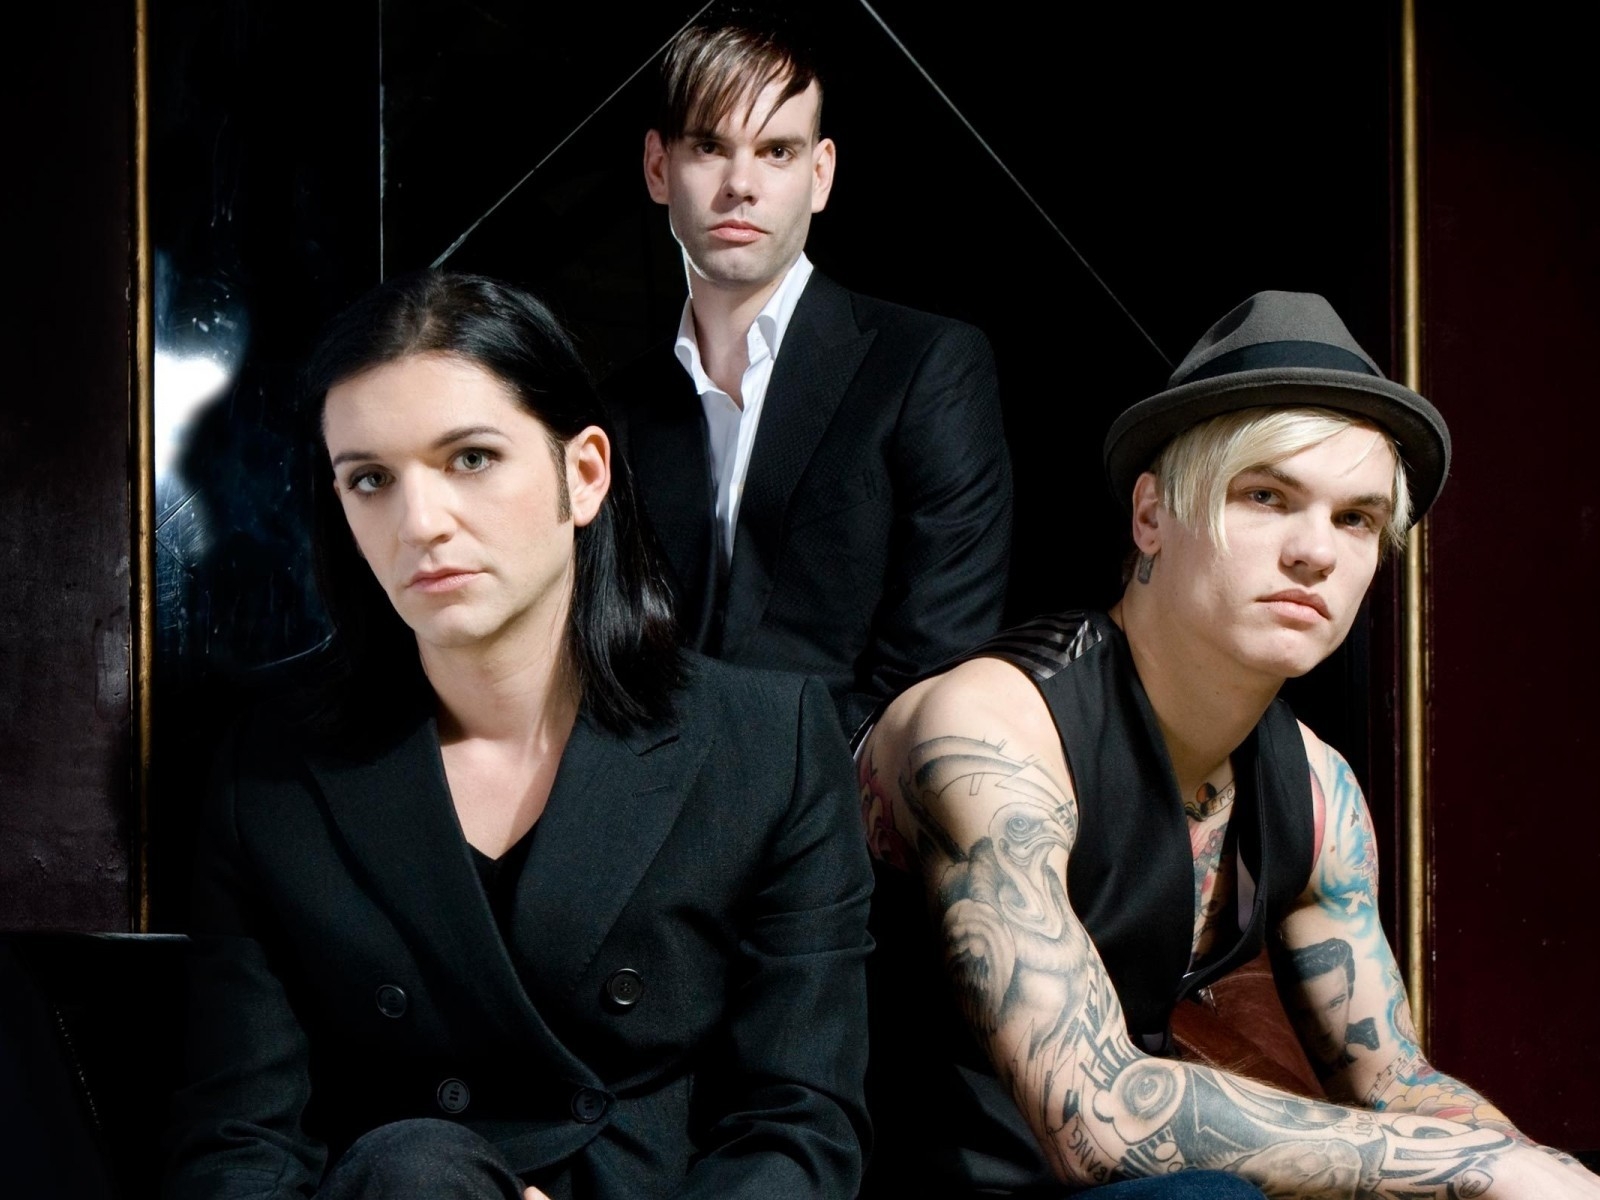 Placebo Band Poster for 1600 x 1200 resolution